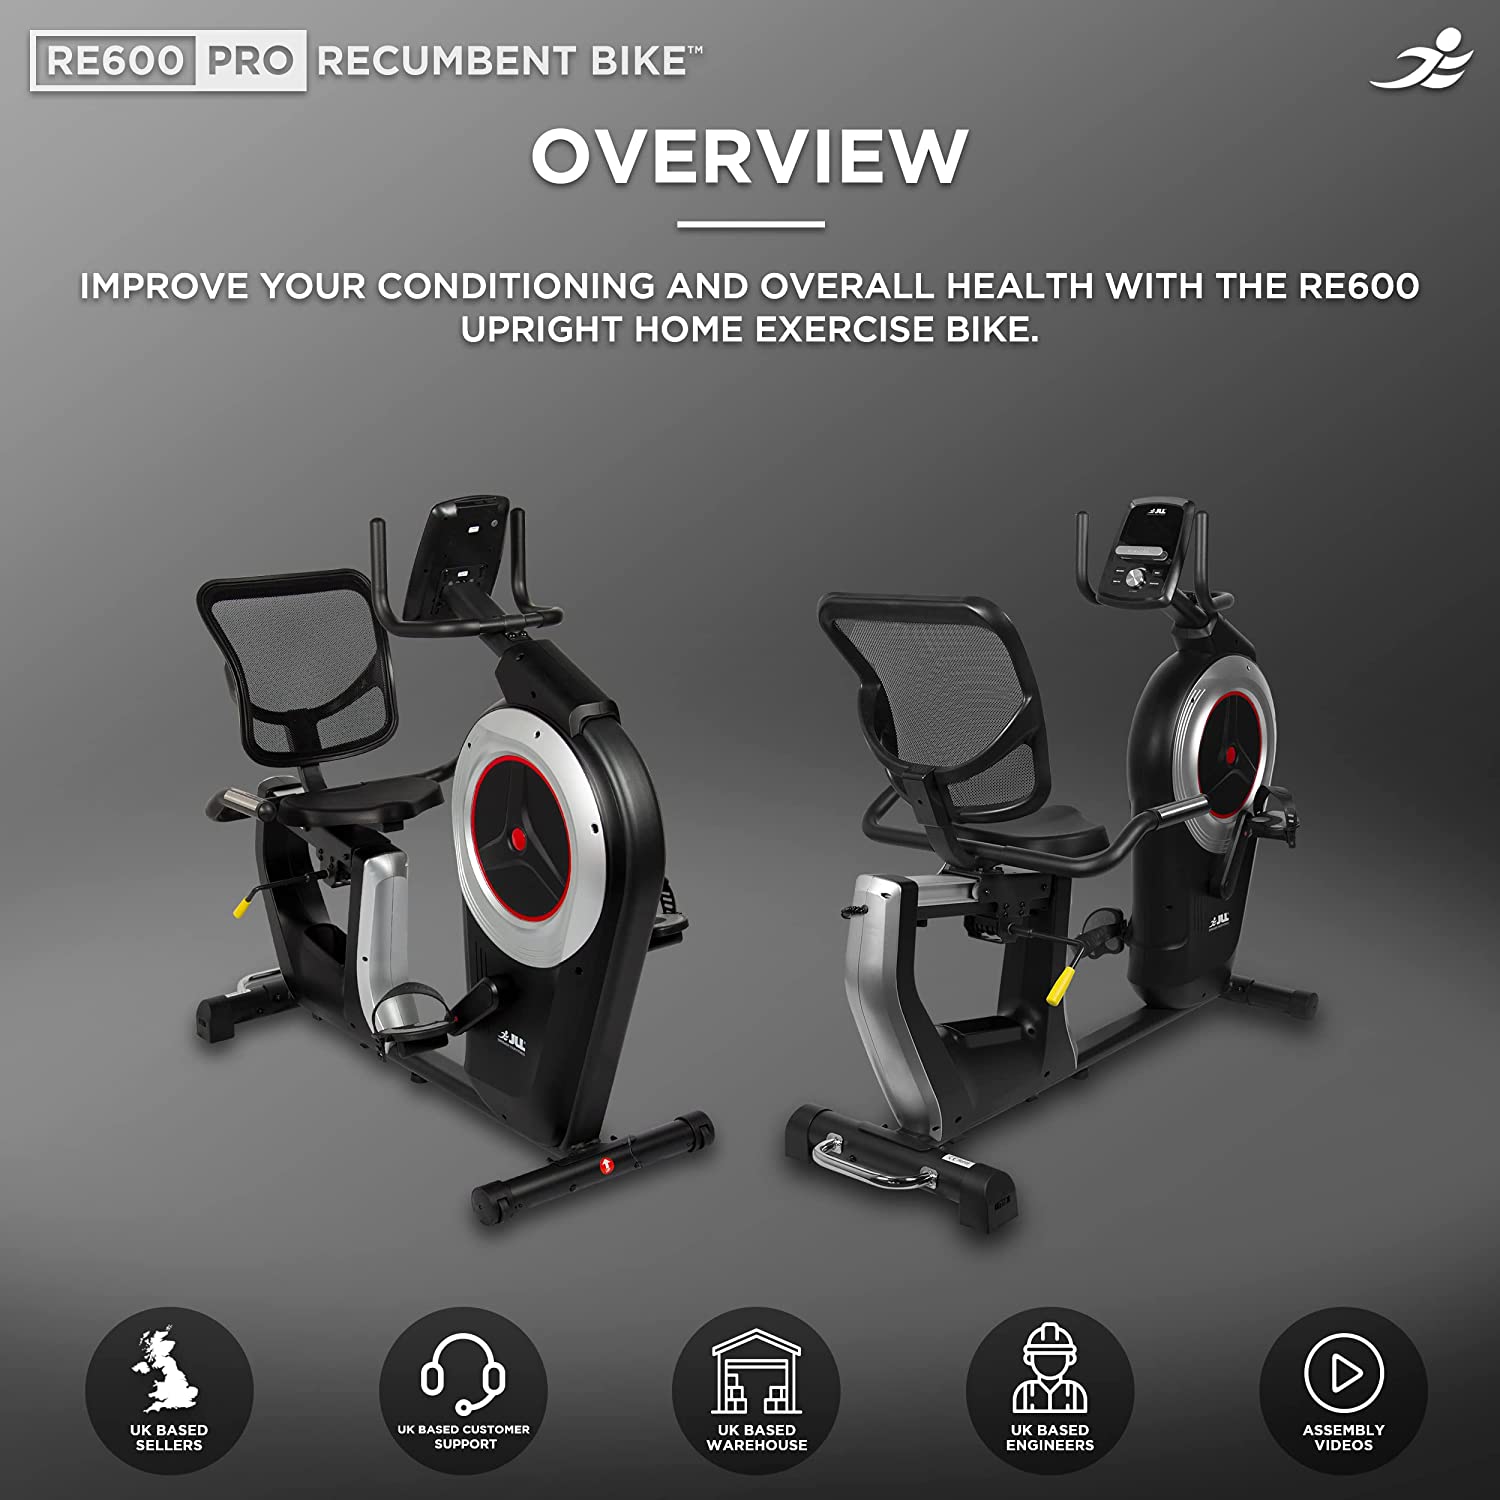 JLL RE600 Pro Recumbent Exercise Bike - Product Overview